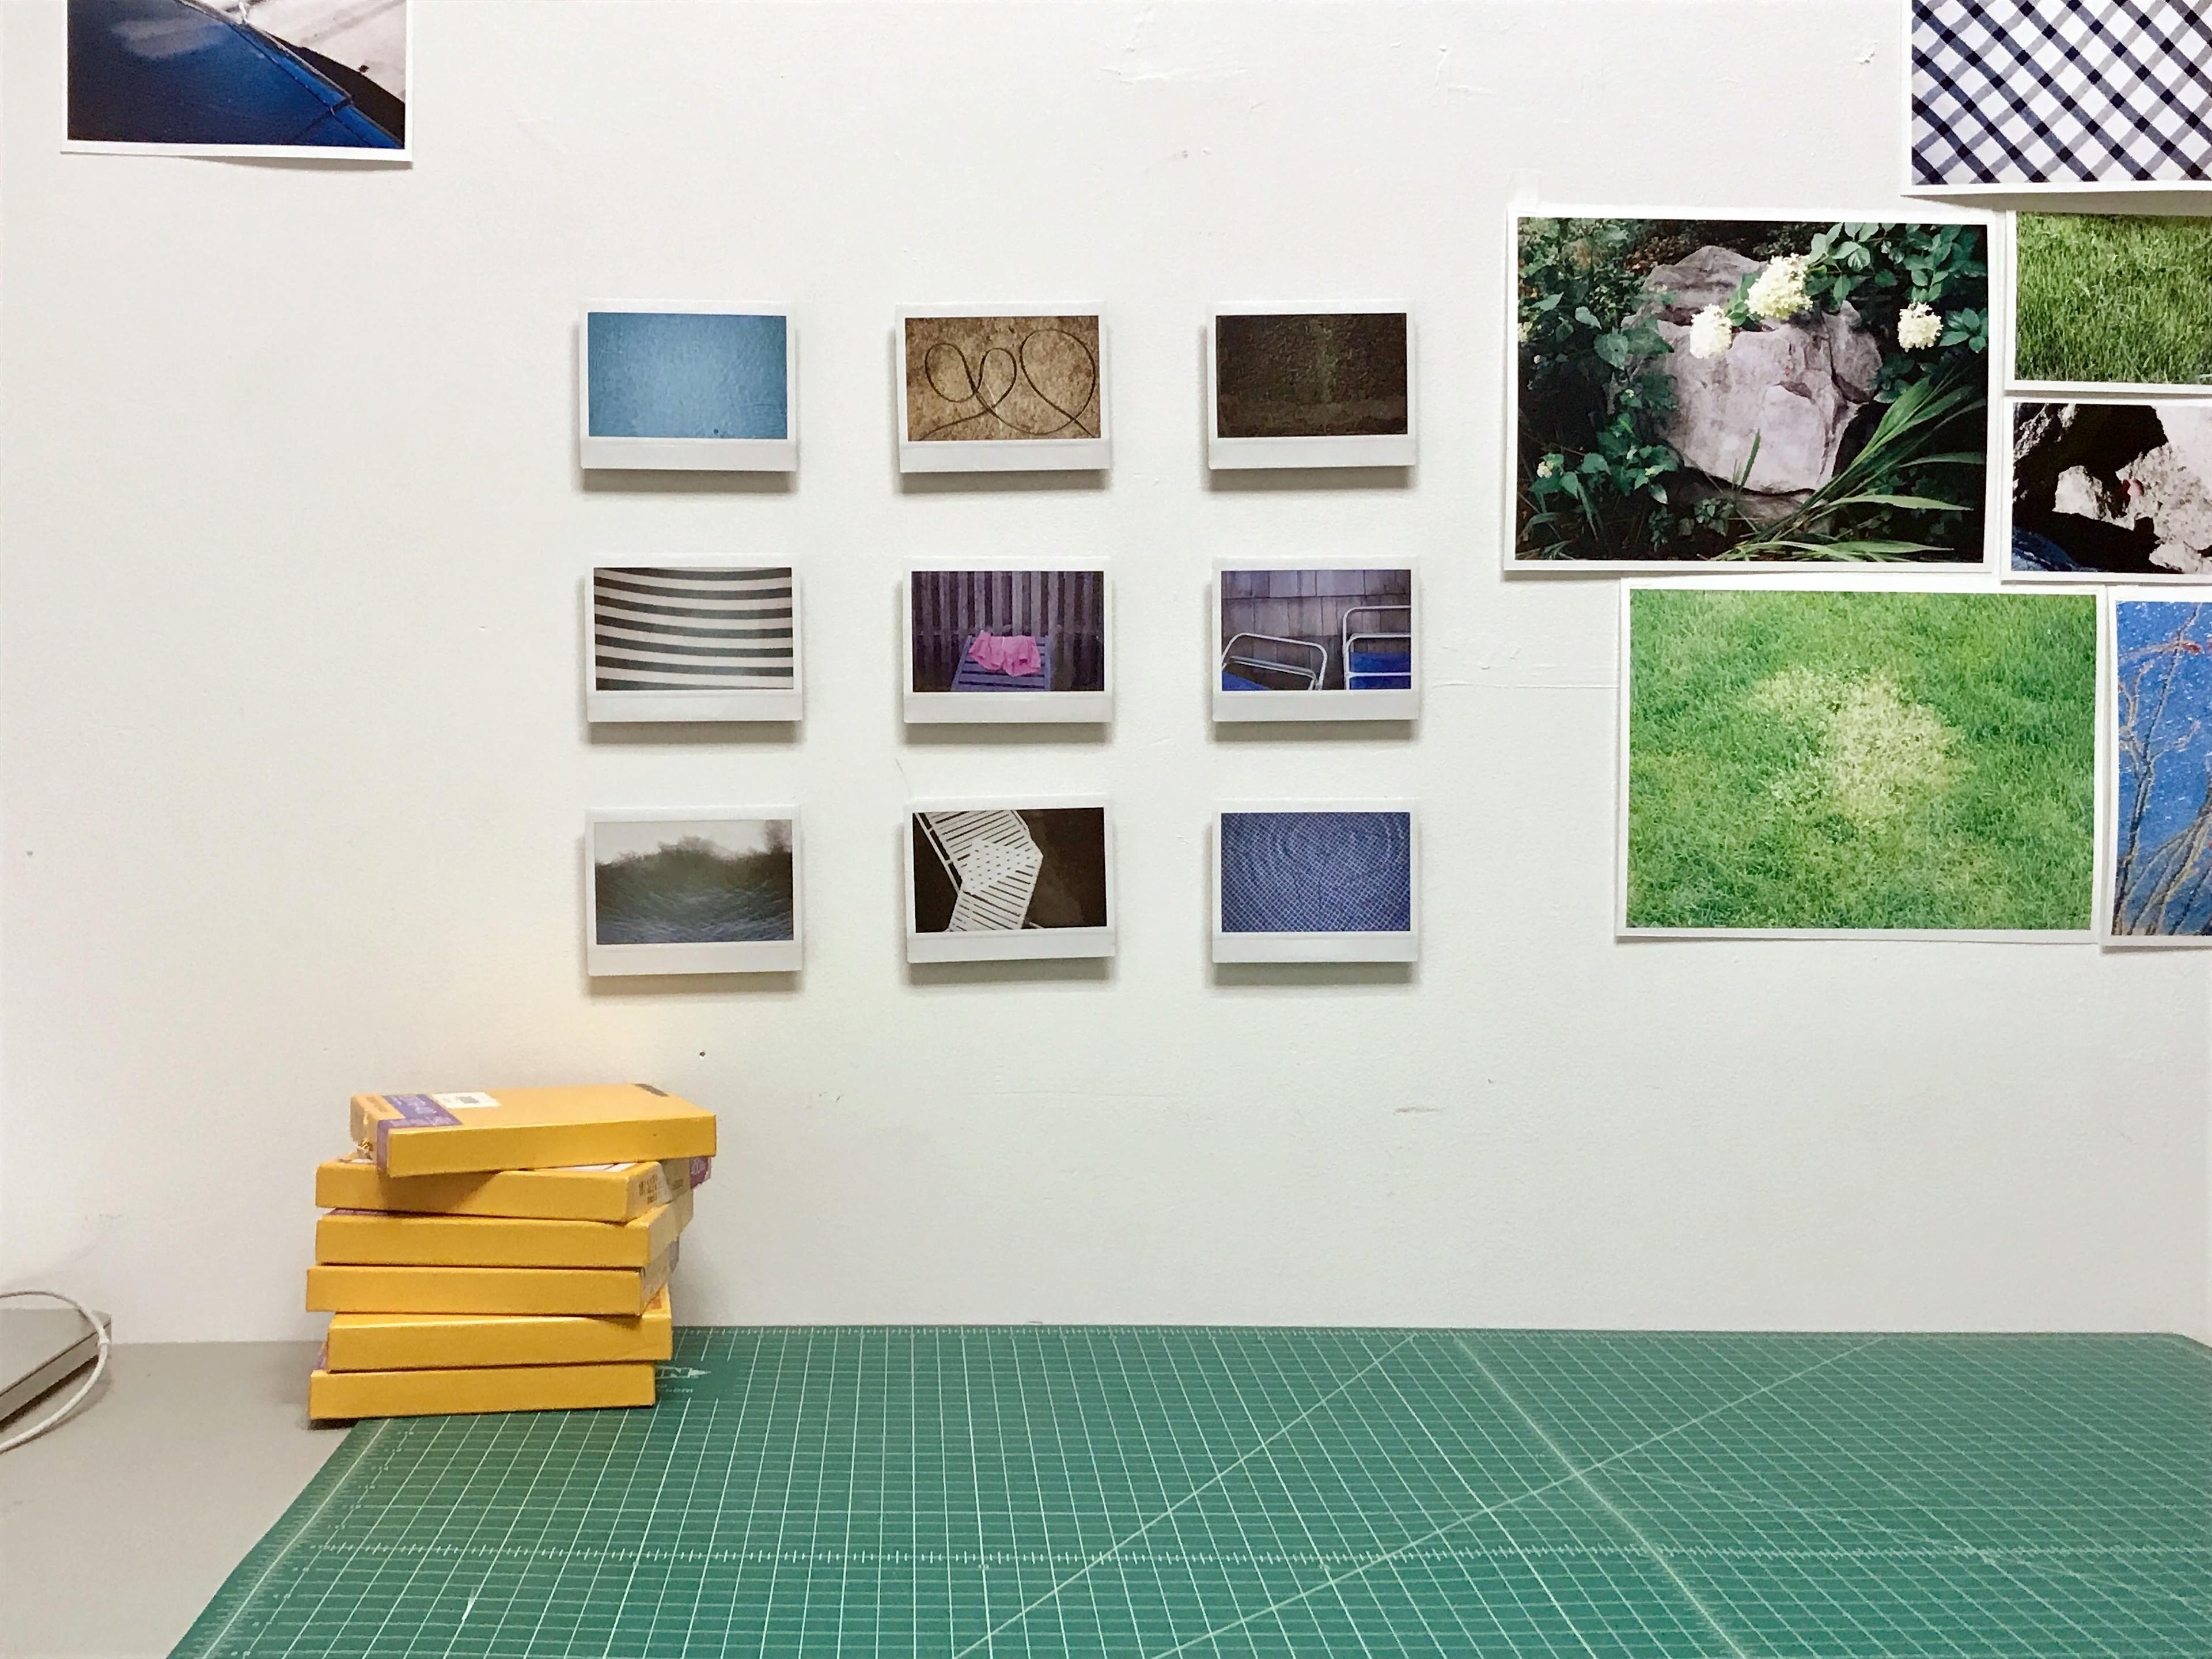 A stack of polaroids and images by artist Ryan James MacFarland pinned up on a wall in his studio.